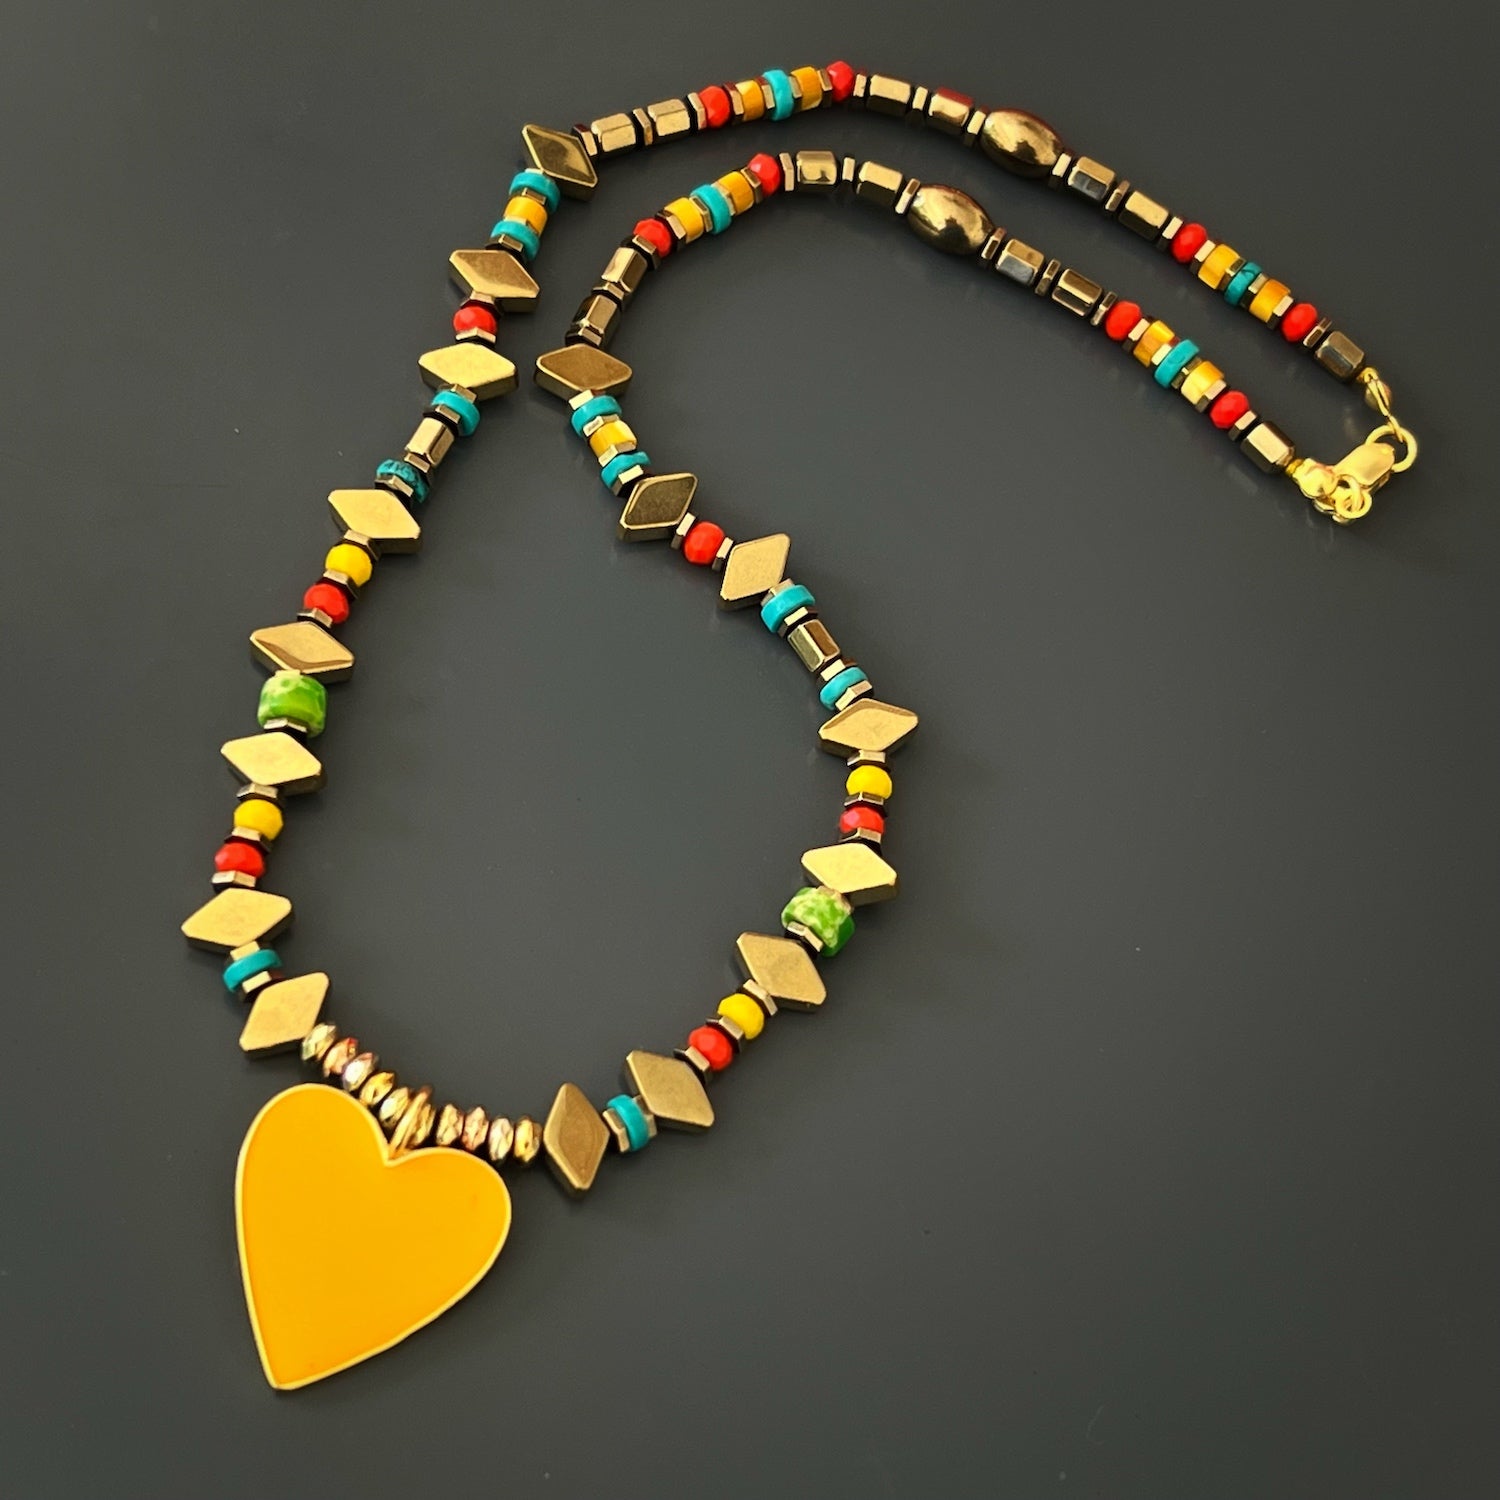 The Joyful Heartbeat Necklace, a burst of color and happiness with its vibrant beads and yellow enamel heart pendant.